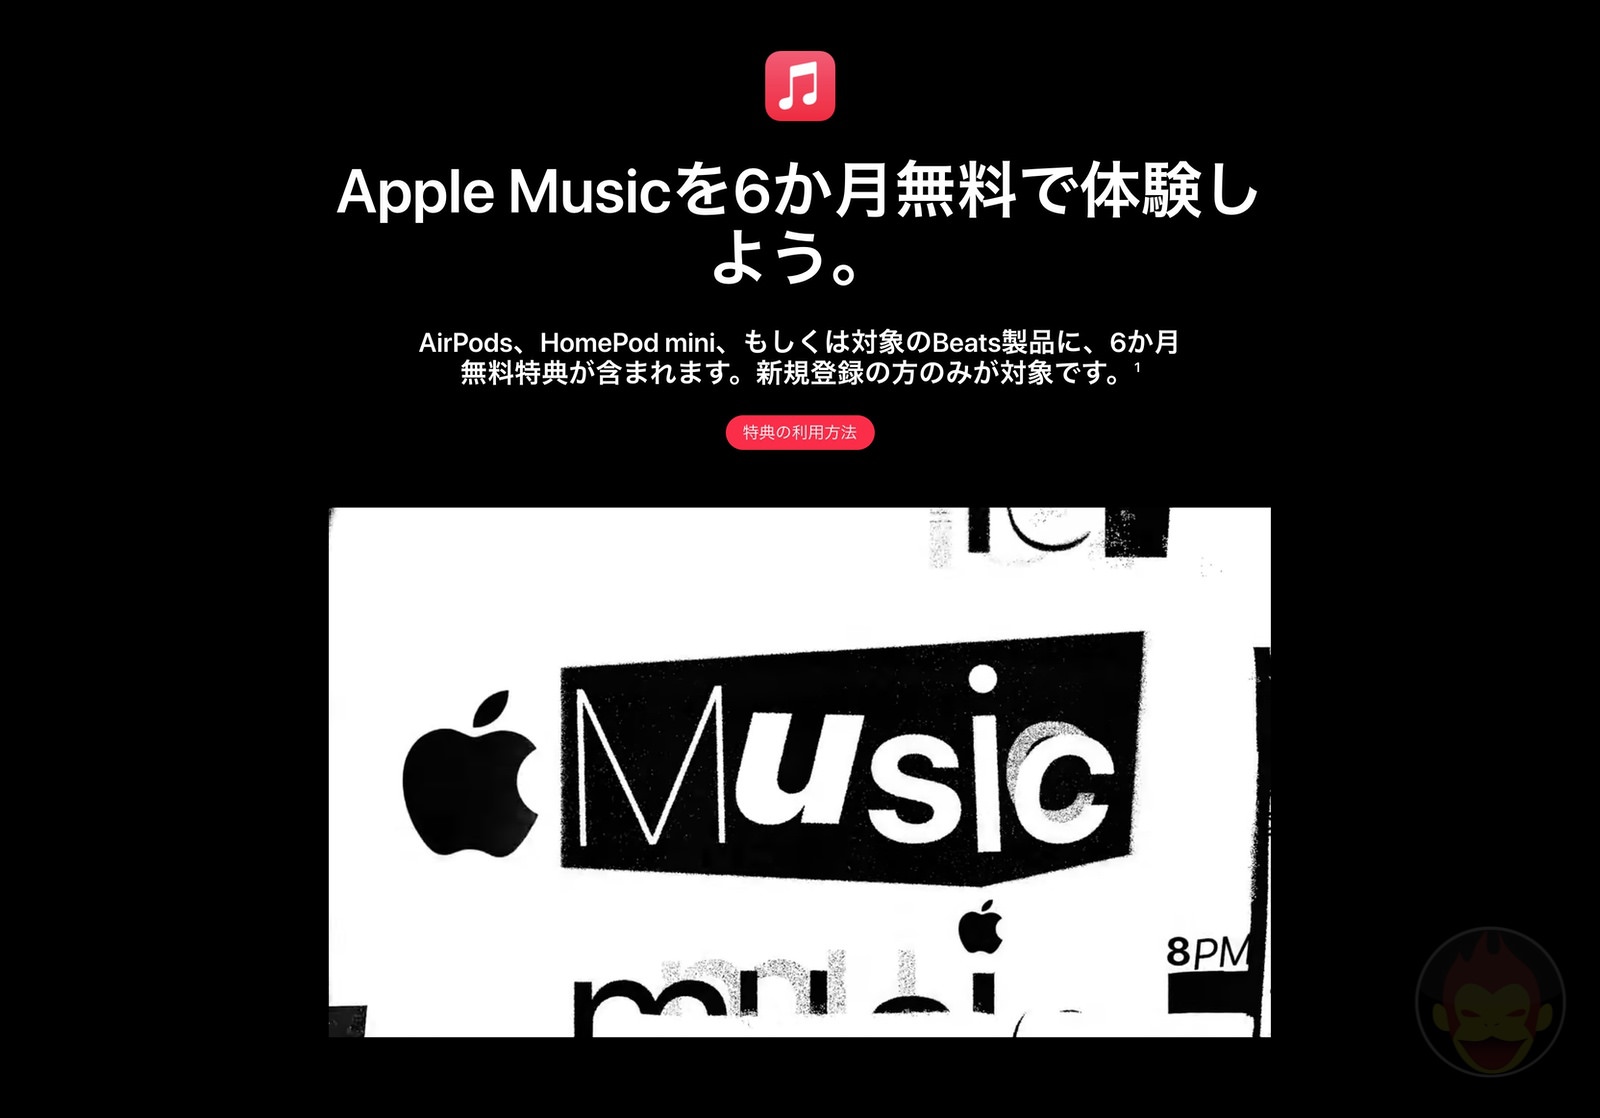 Apple Music 1month trial 01